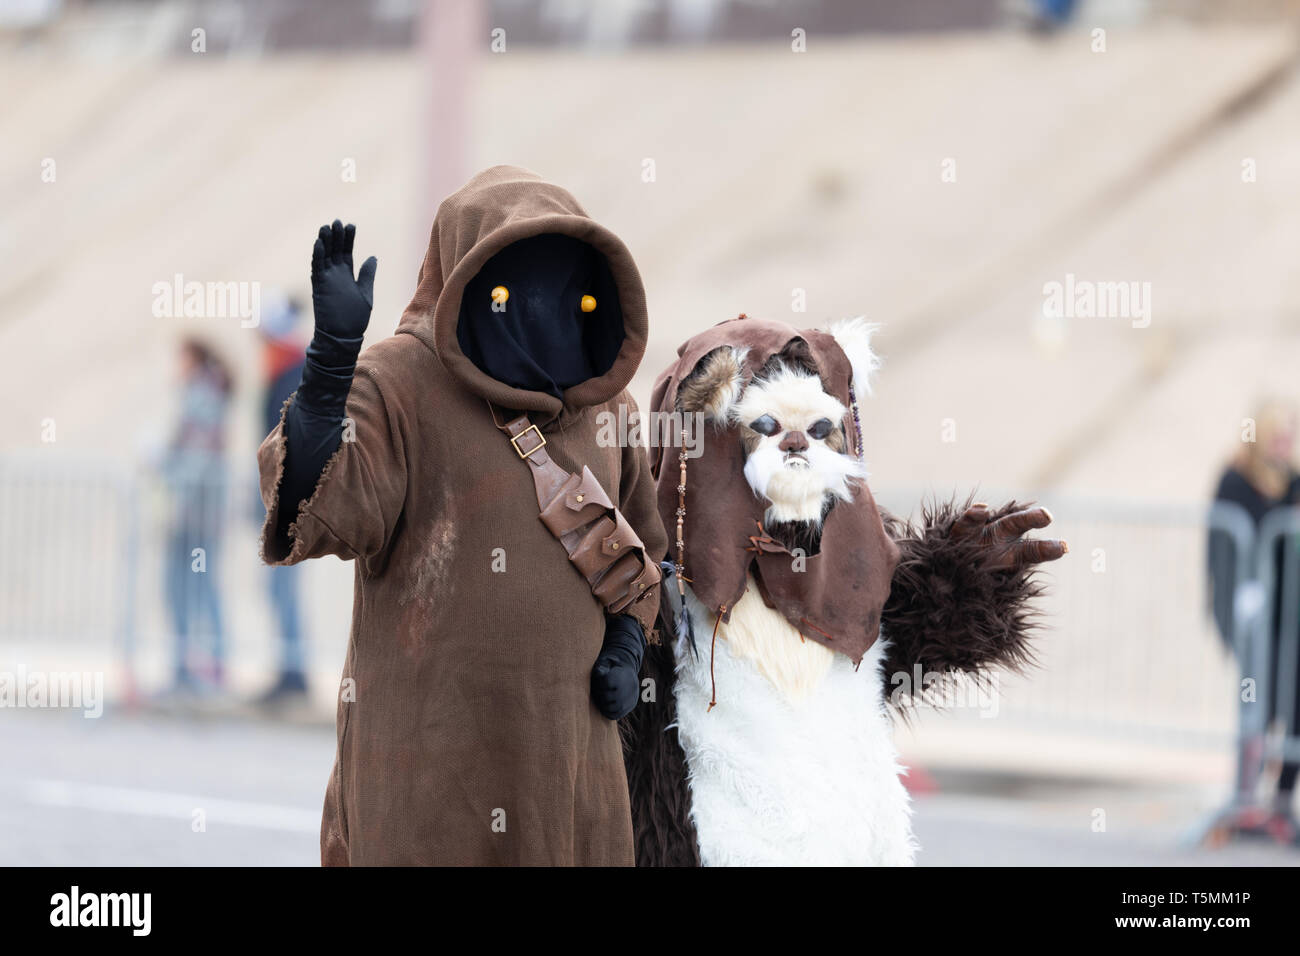 St. Louis, Missouri, USA - March 2, 2019: Bud Light Grand Parade, People dress up as Star Wars characters walking down 7th street during the parade Stock Photo